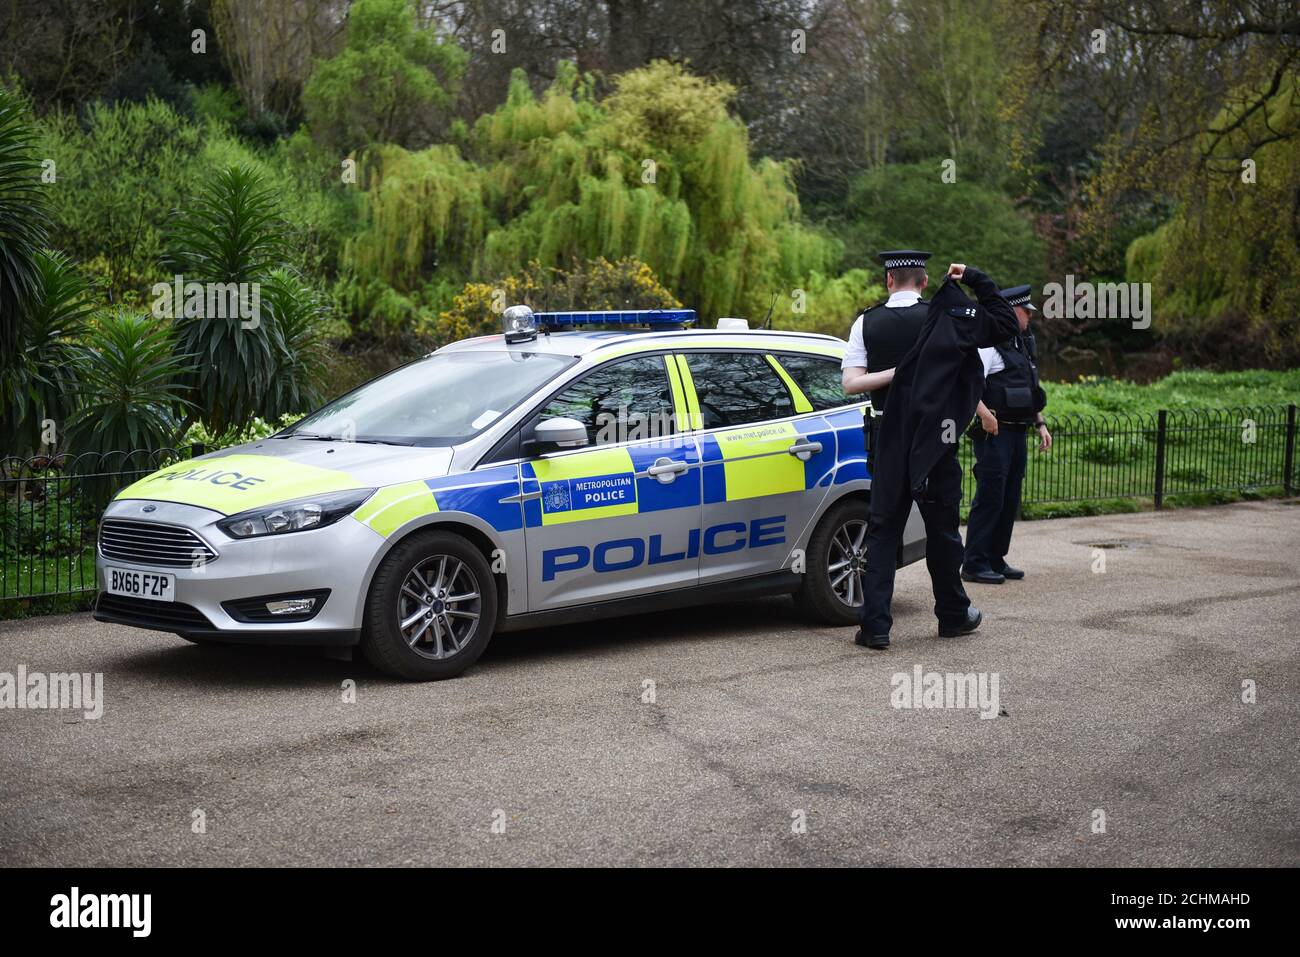 London Metropolitan Police Car in the City of London. Two policemen are sent to a possible crime scene in the park. London, UK April 2017 Stock Photo